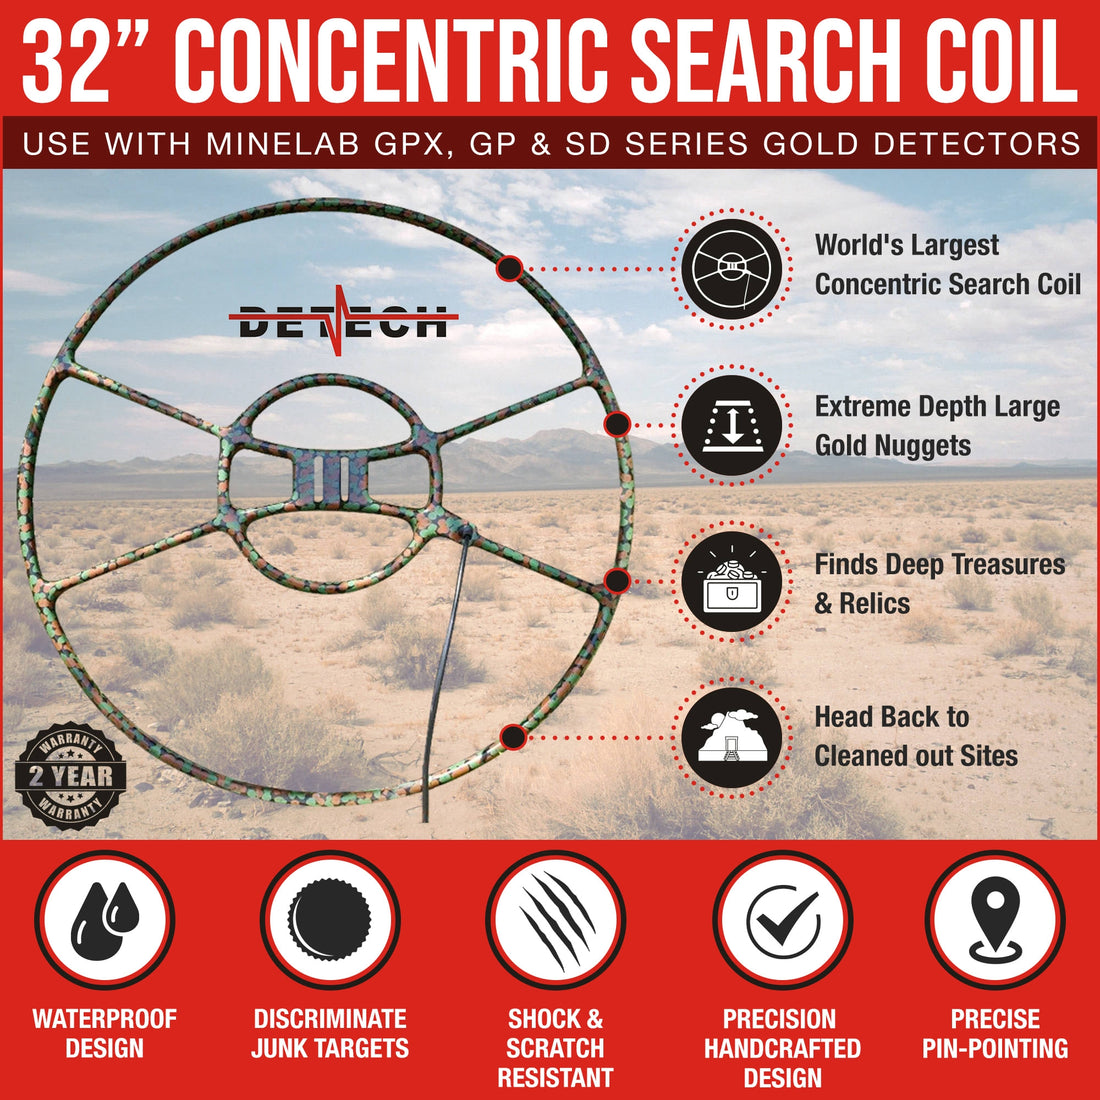 Detech 32" Concentric Search Coil for Minelab GPX, GP, SD Series Gold Detectors Product Features